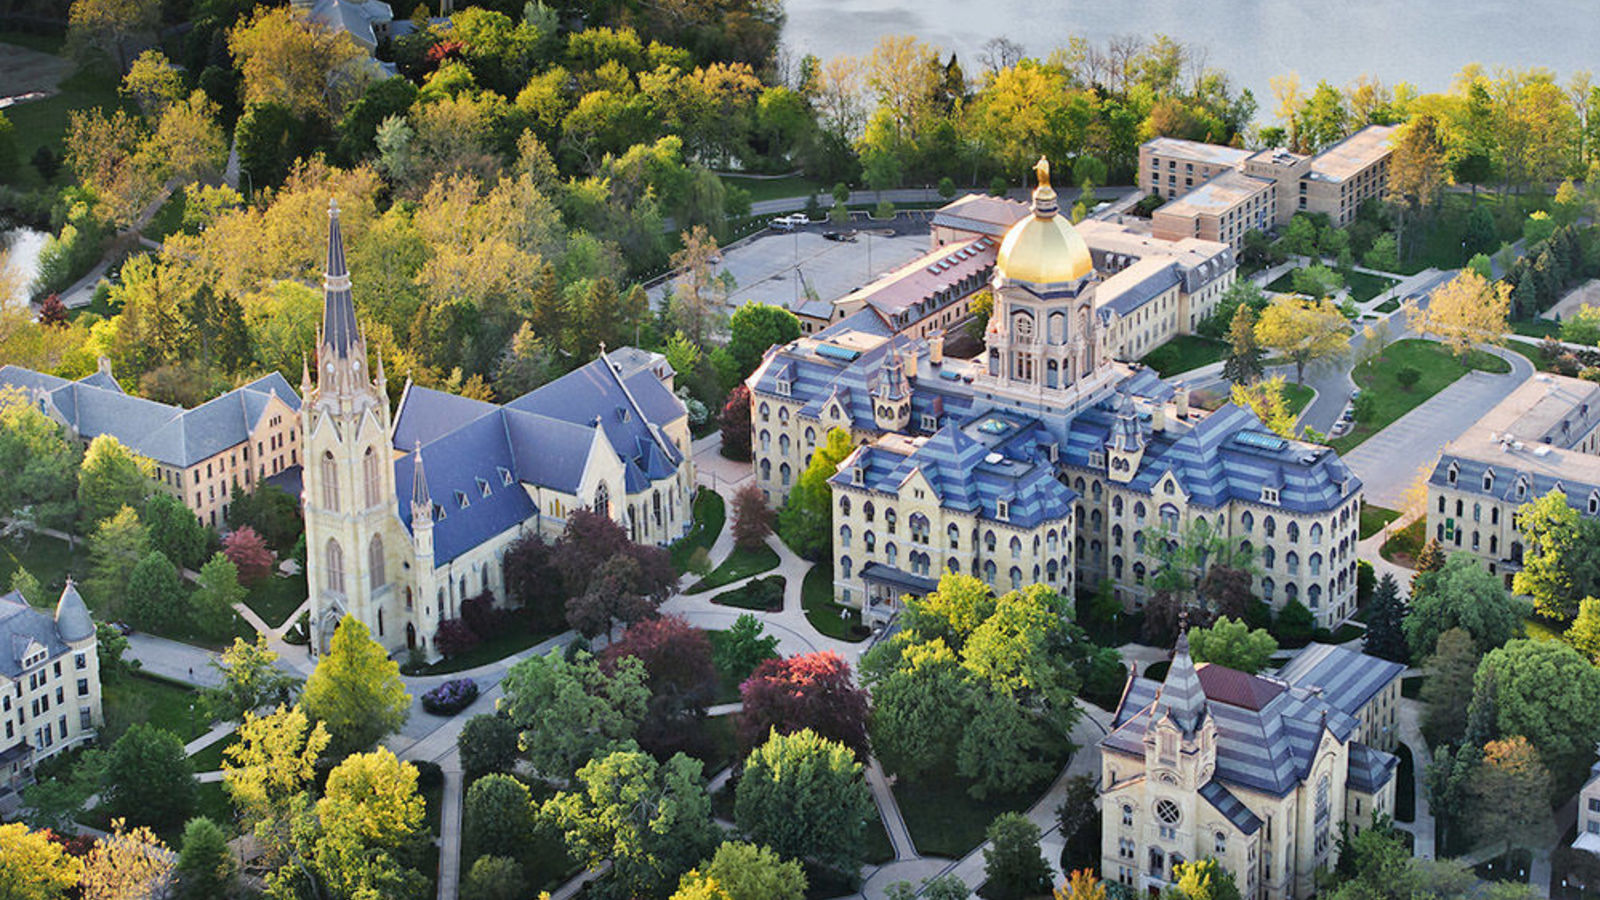 notre dame phd philosophy admissions